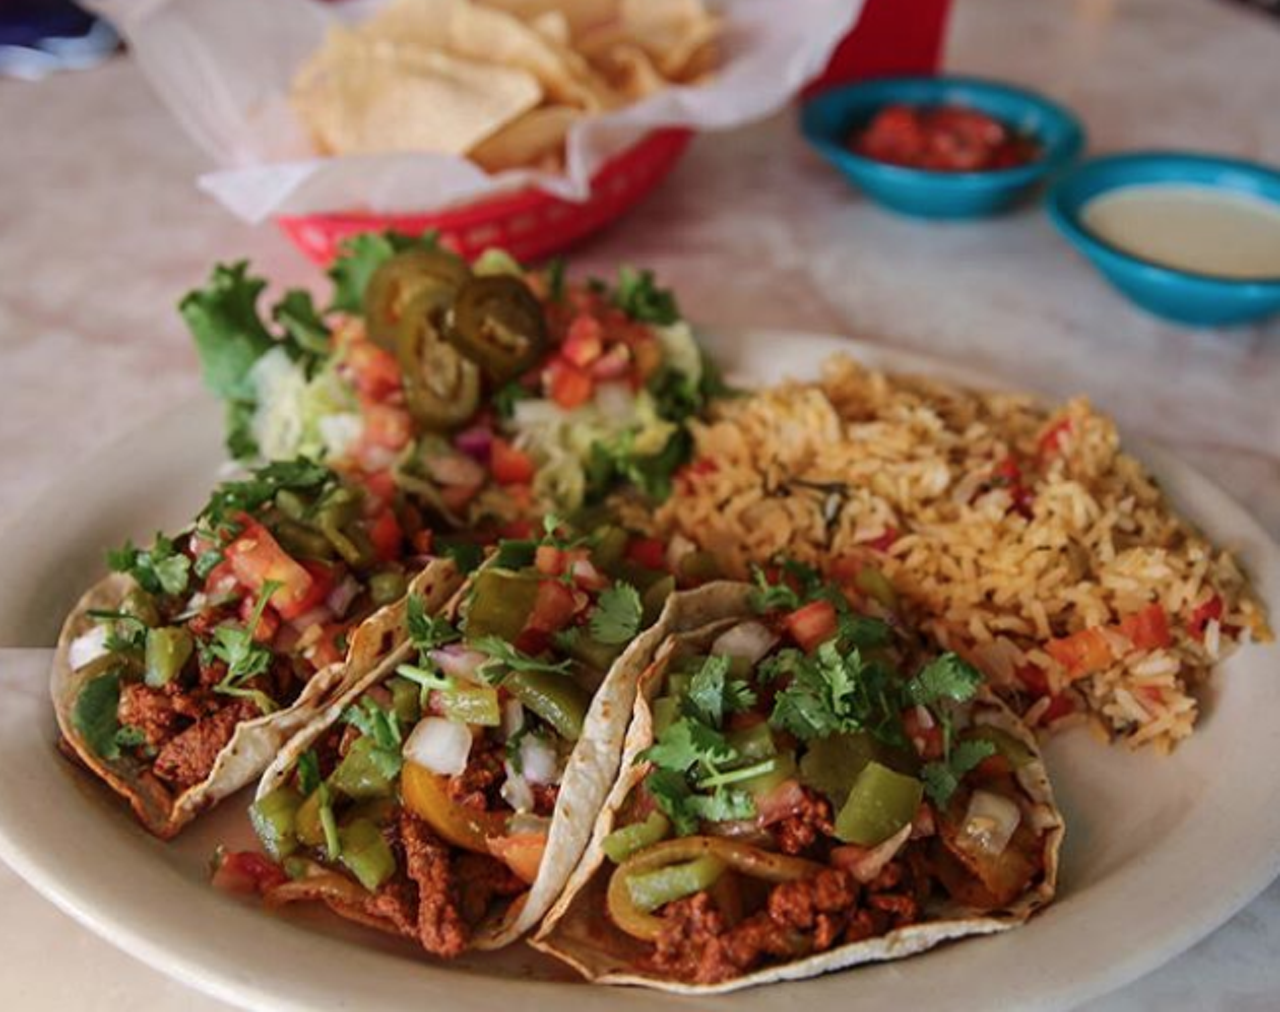 Chuy's
Multiple locations, chuys.com
Founded by Mike Young and John Zapp in 1982, this Austin-based chain has more than 100 locations and continues to grow. With a few San Antonio outposts, locals can get their fill of Austin’s take on Tex-Mex bites like enchiladas and burritos.
Photo via Instagram / chuysrestaurant